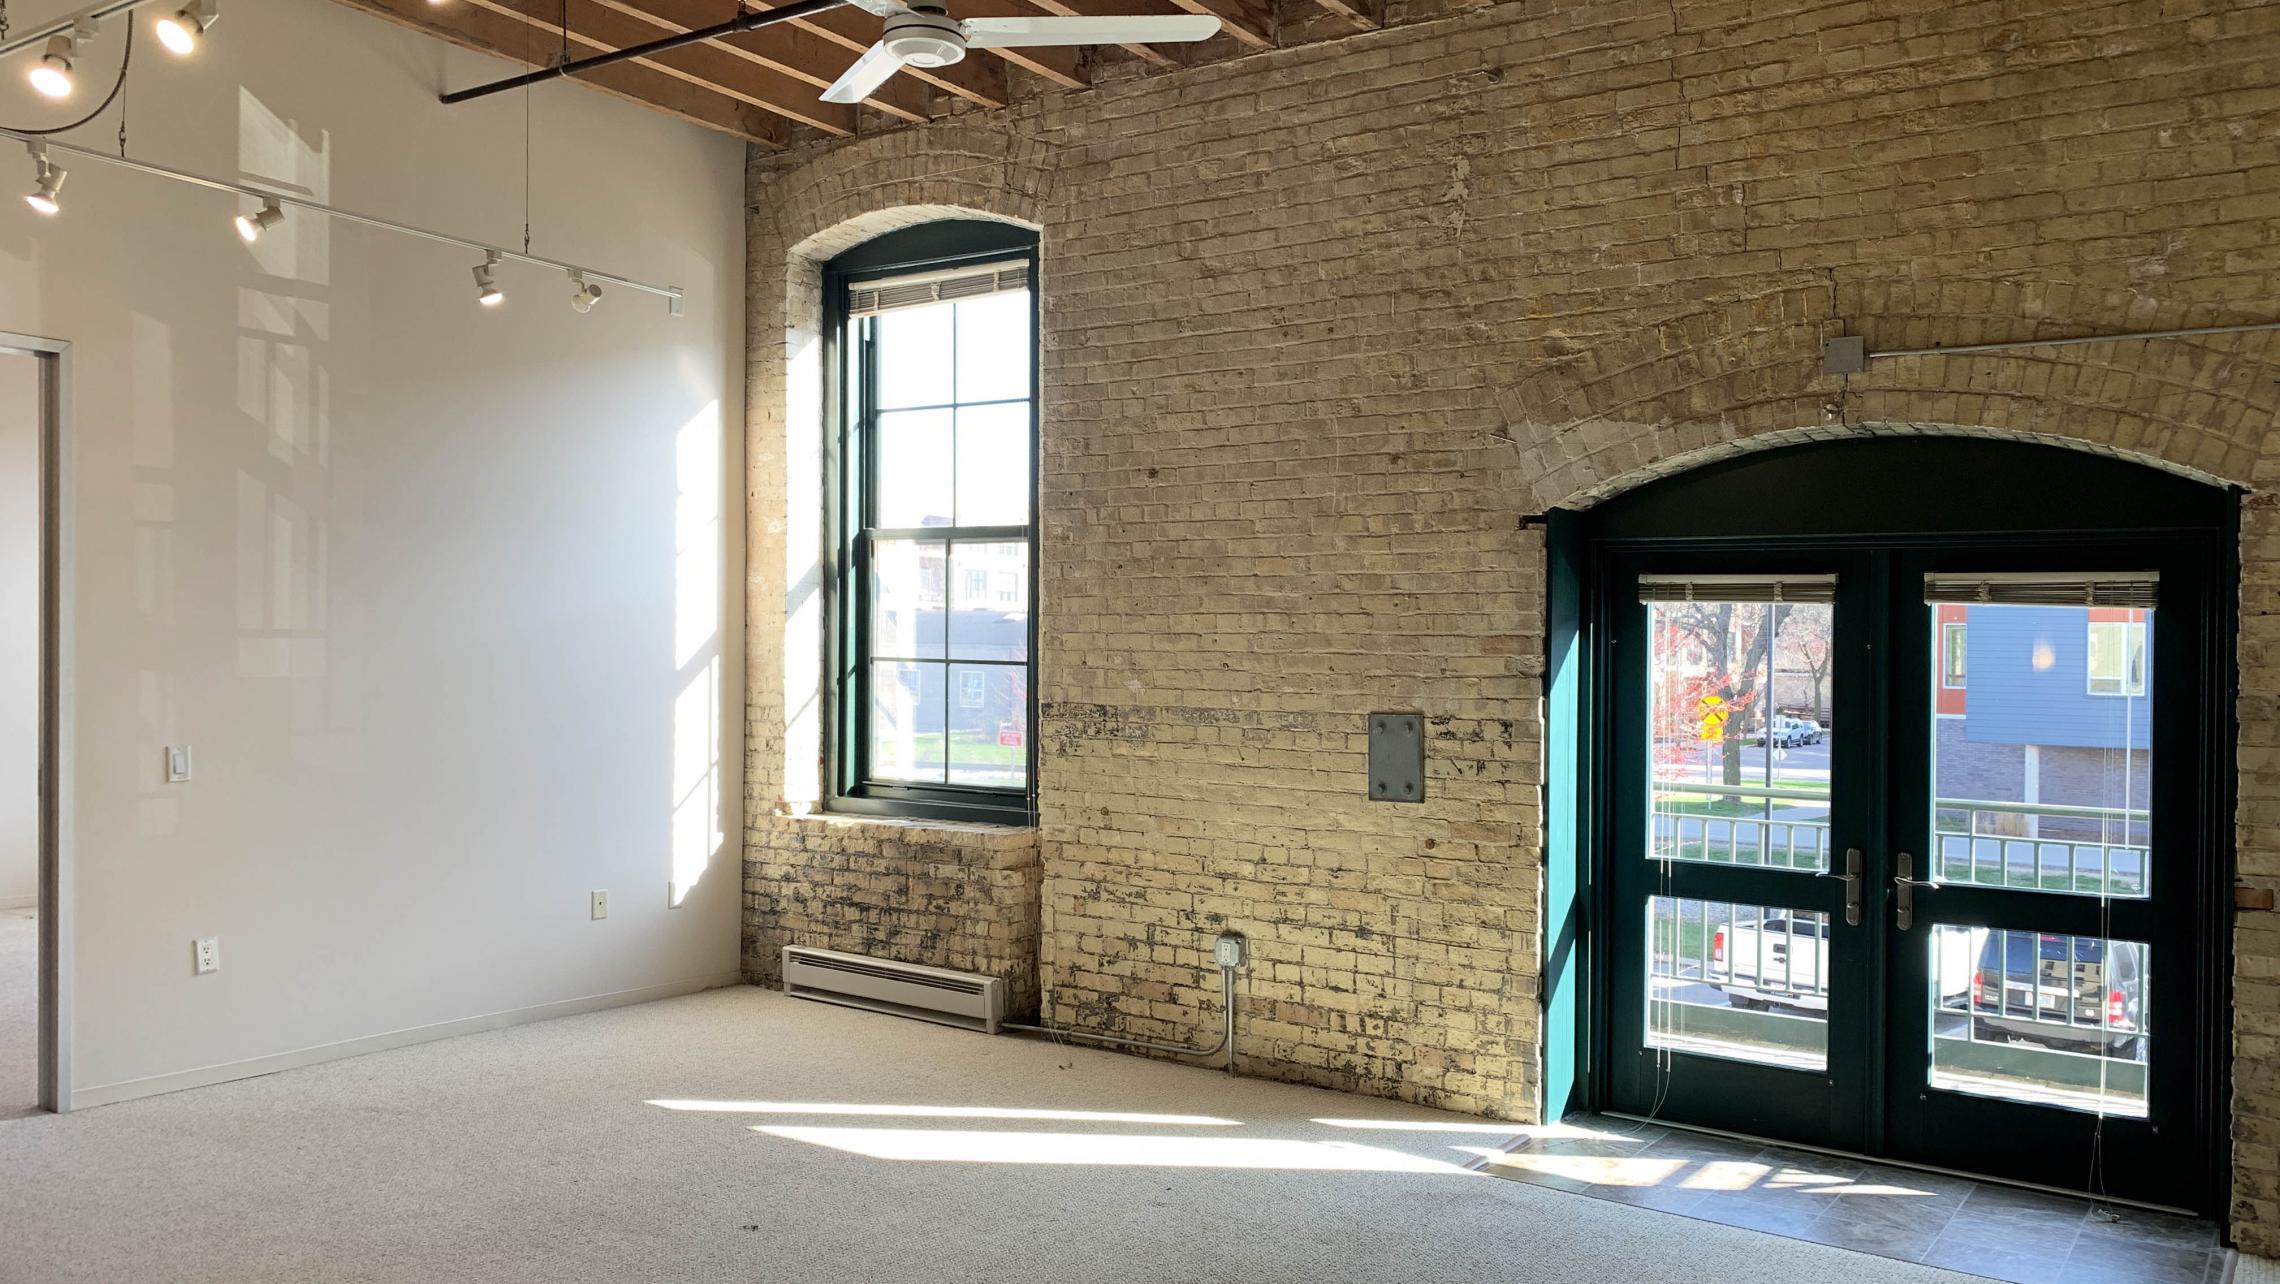 Tobacco-Lofts-At-The-Yards-Apartment-E213-Two-Bedroom-Living-Room-Balcony-Historic-Design-Exposed-Brick-Timber-Beams-Downtwon-Madison-Bike-Lake-Cats-Fitness